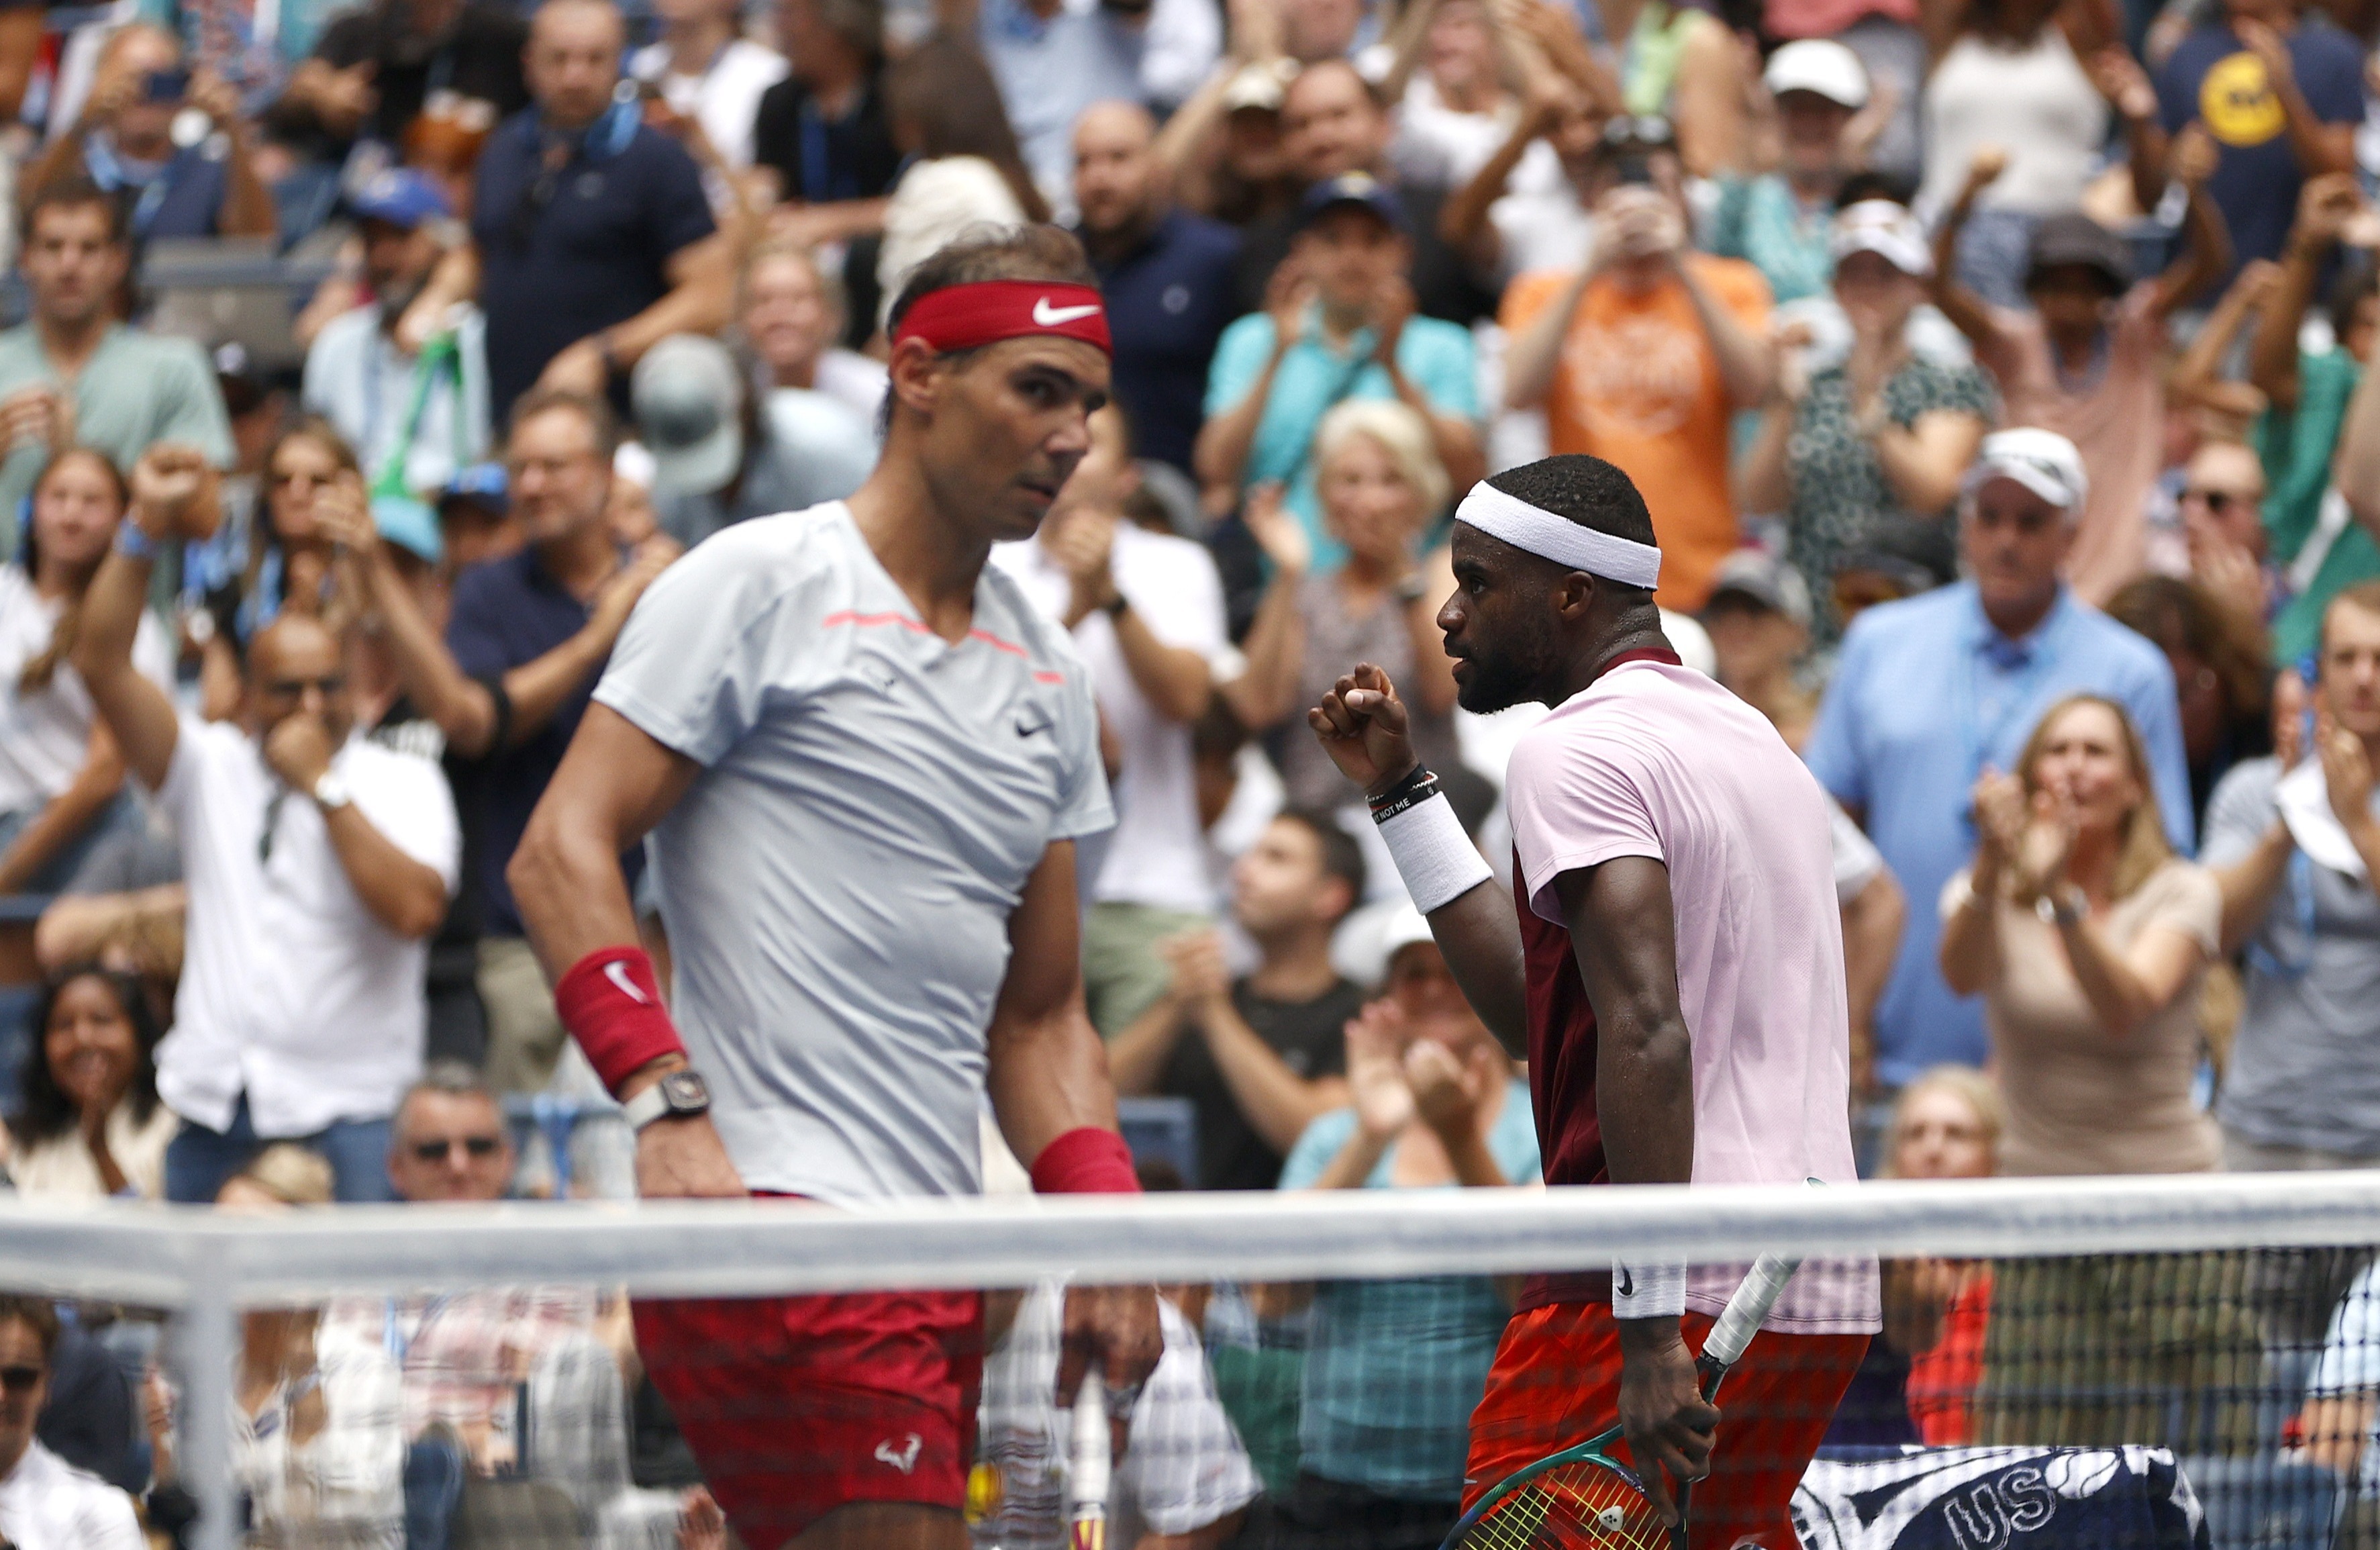 , Rafael Nadal STUNNED at US Open as Frances Tiafoe delights home crowd to hand Spaniard first Slam loss this year